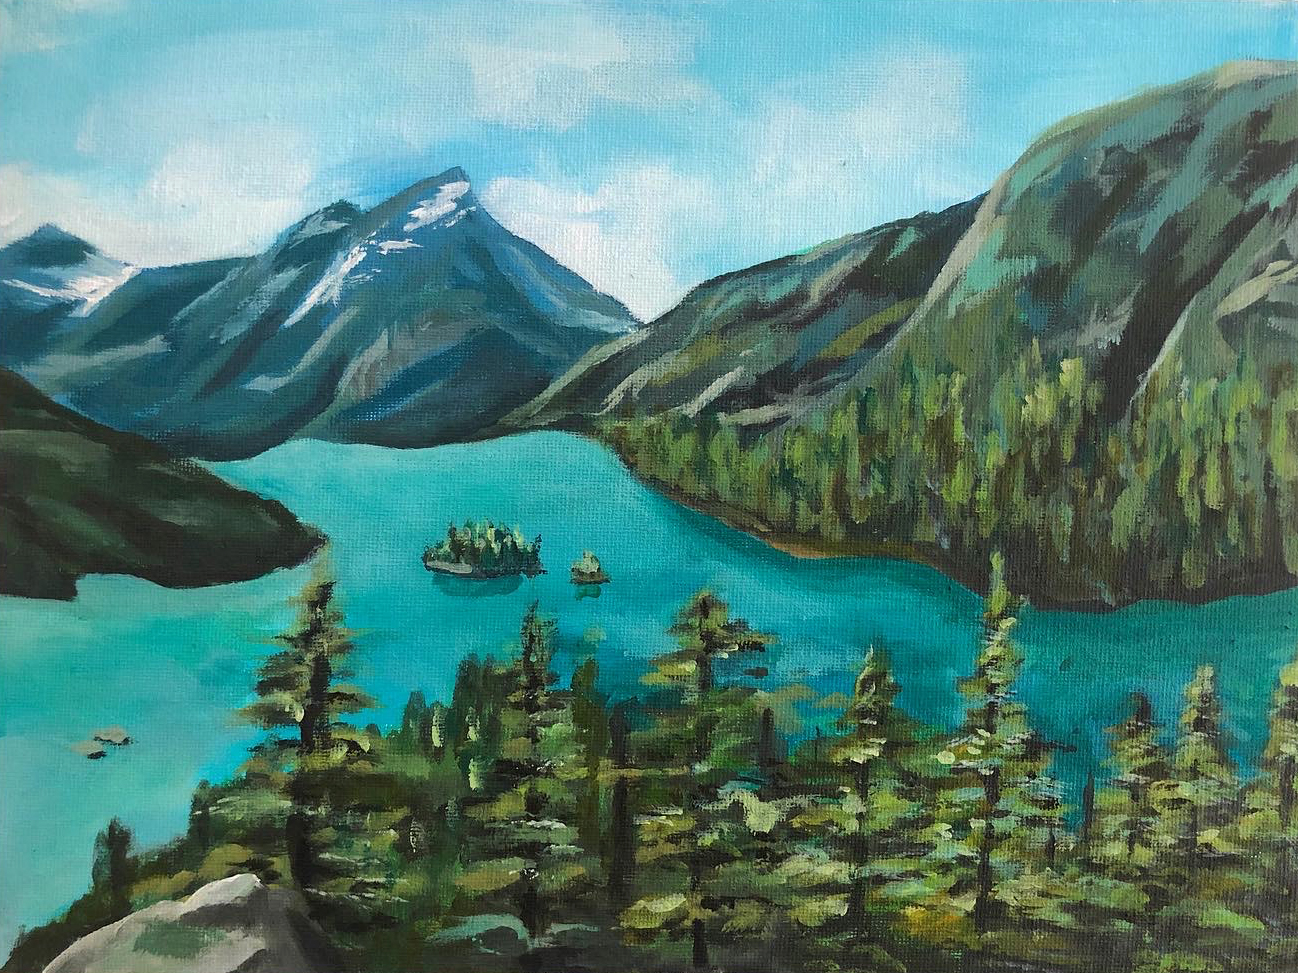 Joanna Young | Diablo Lake, 2020 | Acrylic on canvas panel,  9 x 12 inches